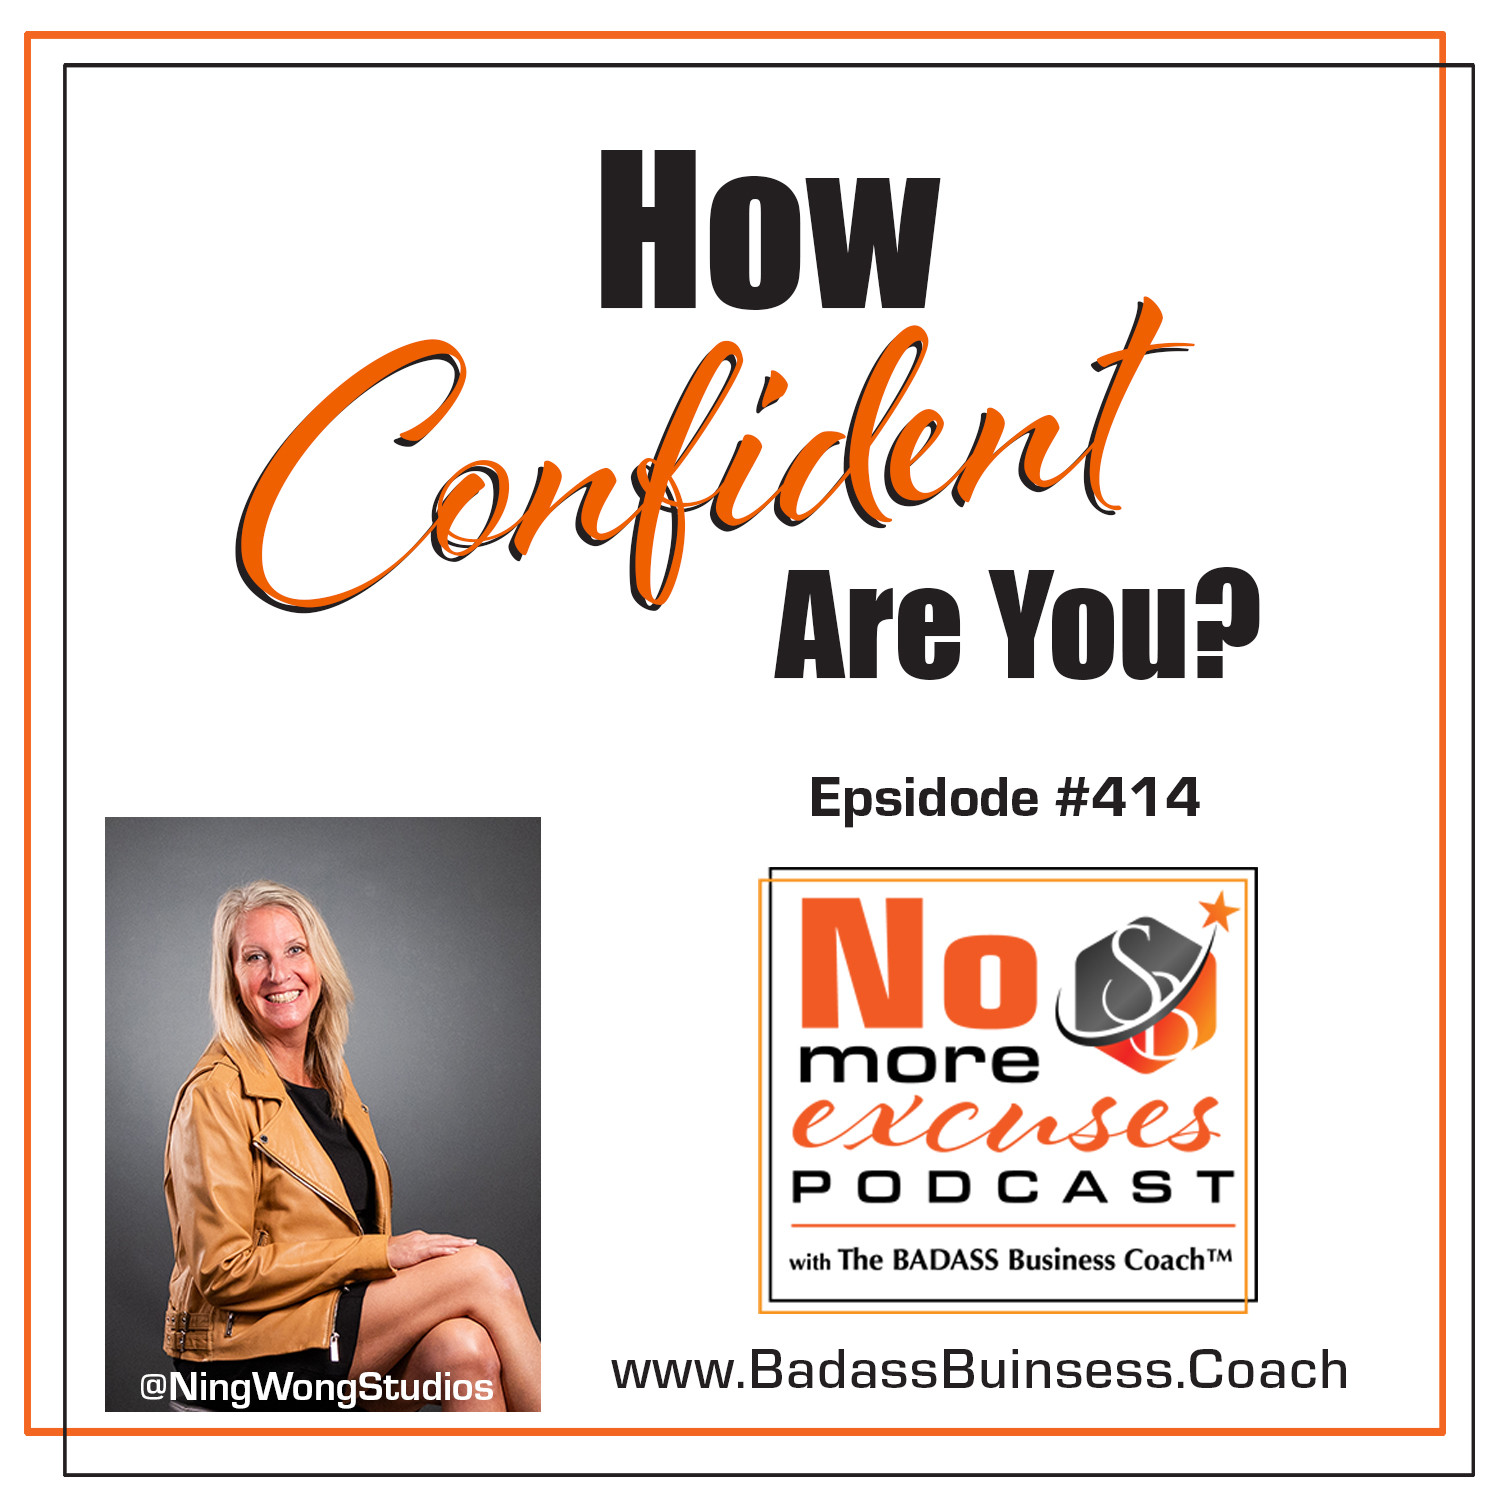 Podcast #414: How Confident Are You?